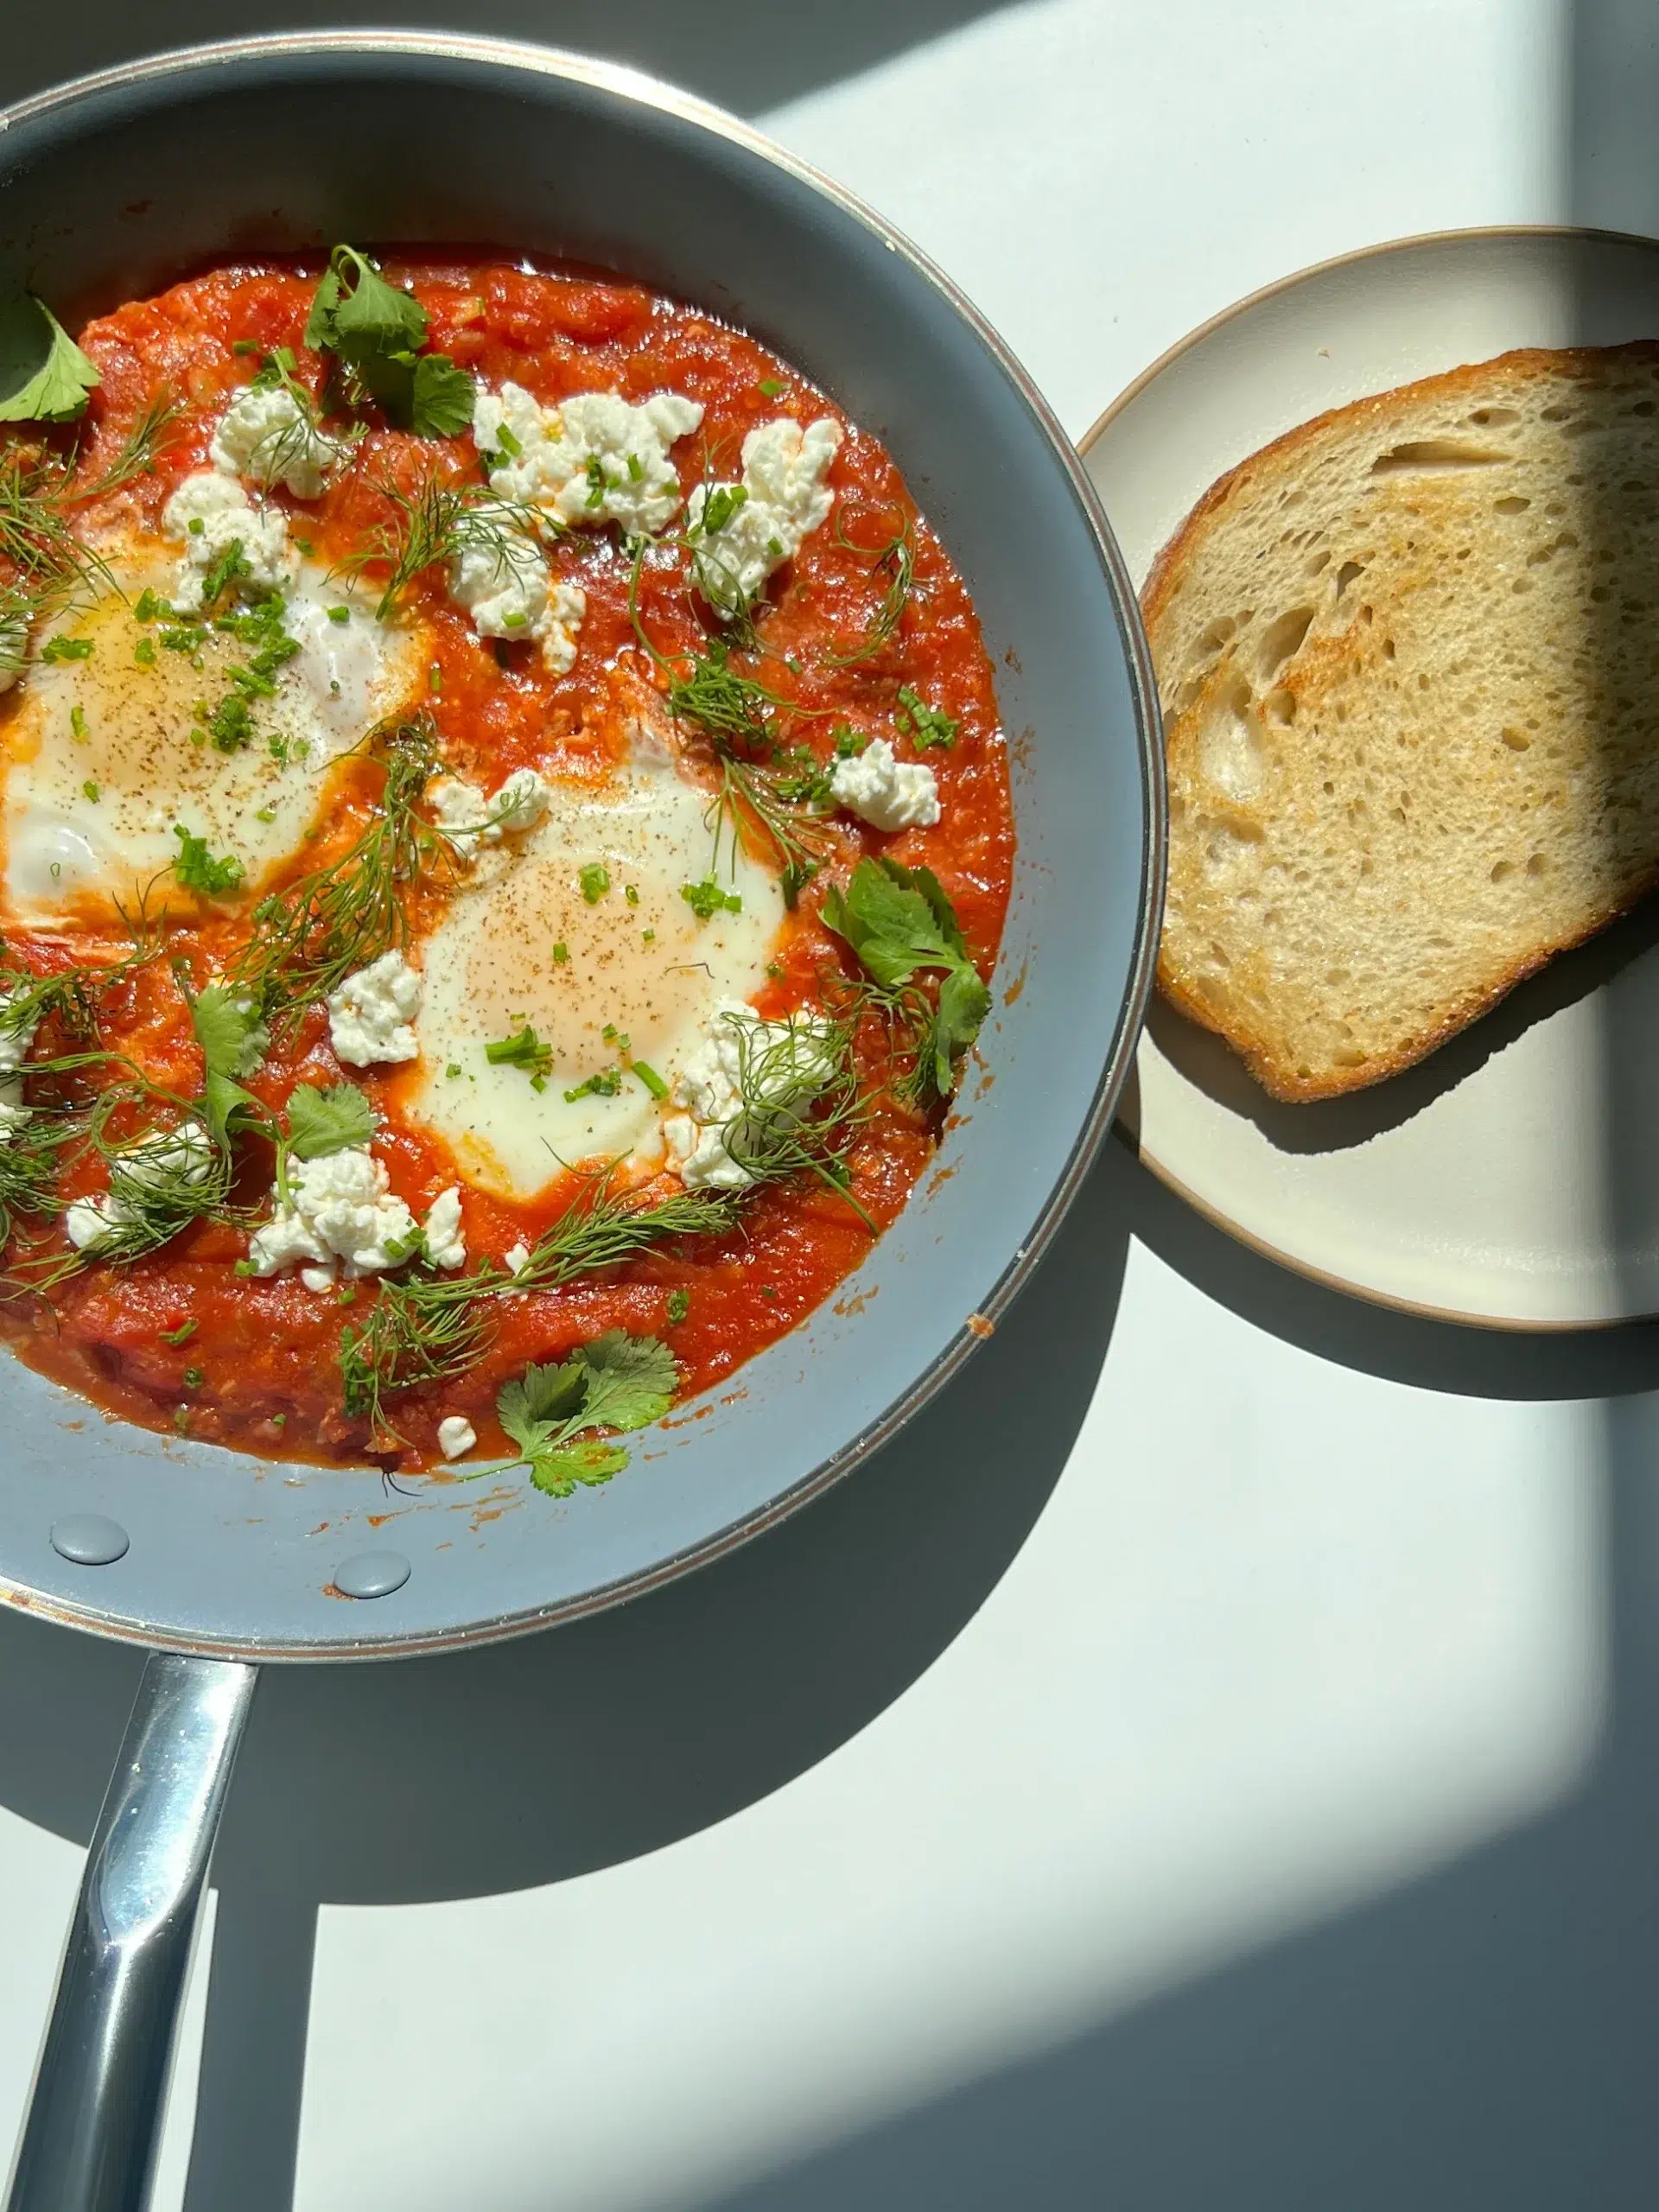 A pan containing shakshuka with poached eggs, tomato sauce, herbs, and cheese sits next to a slice of toasted bread on a plate under sunlight.